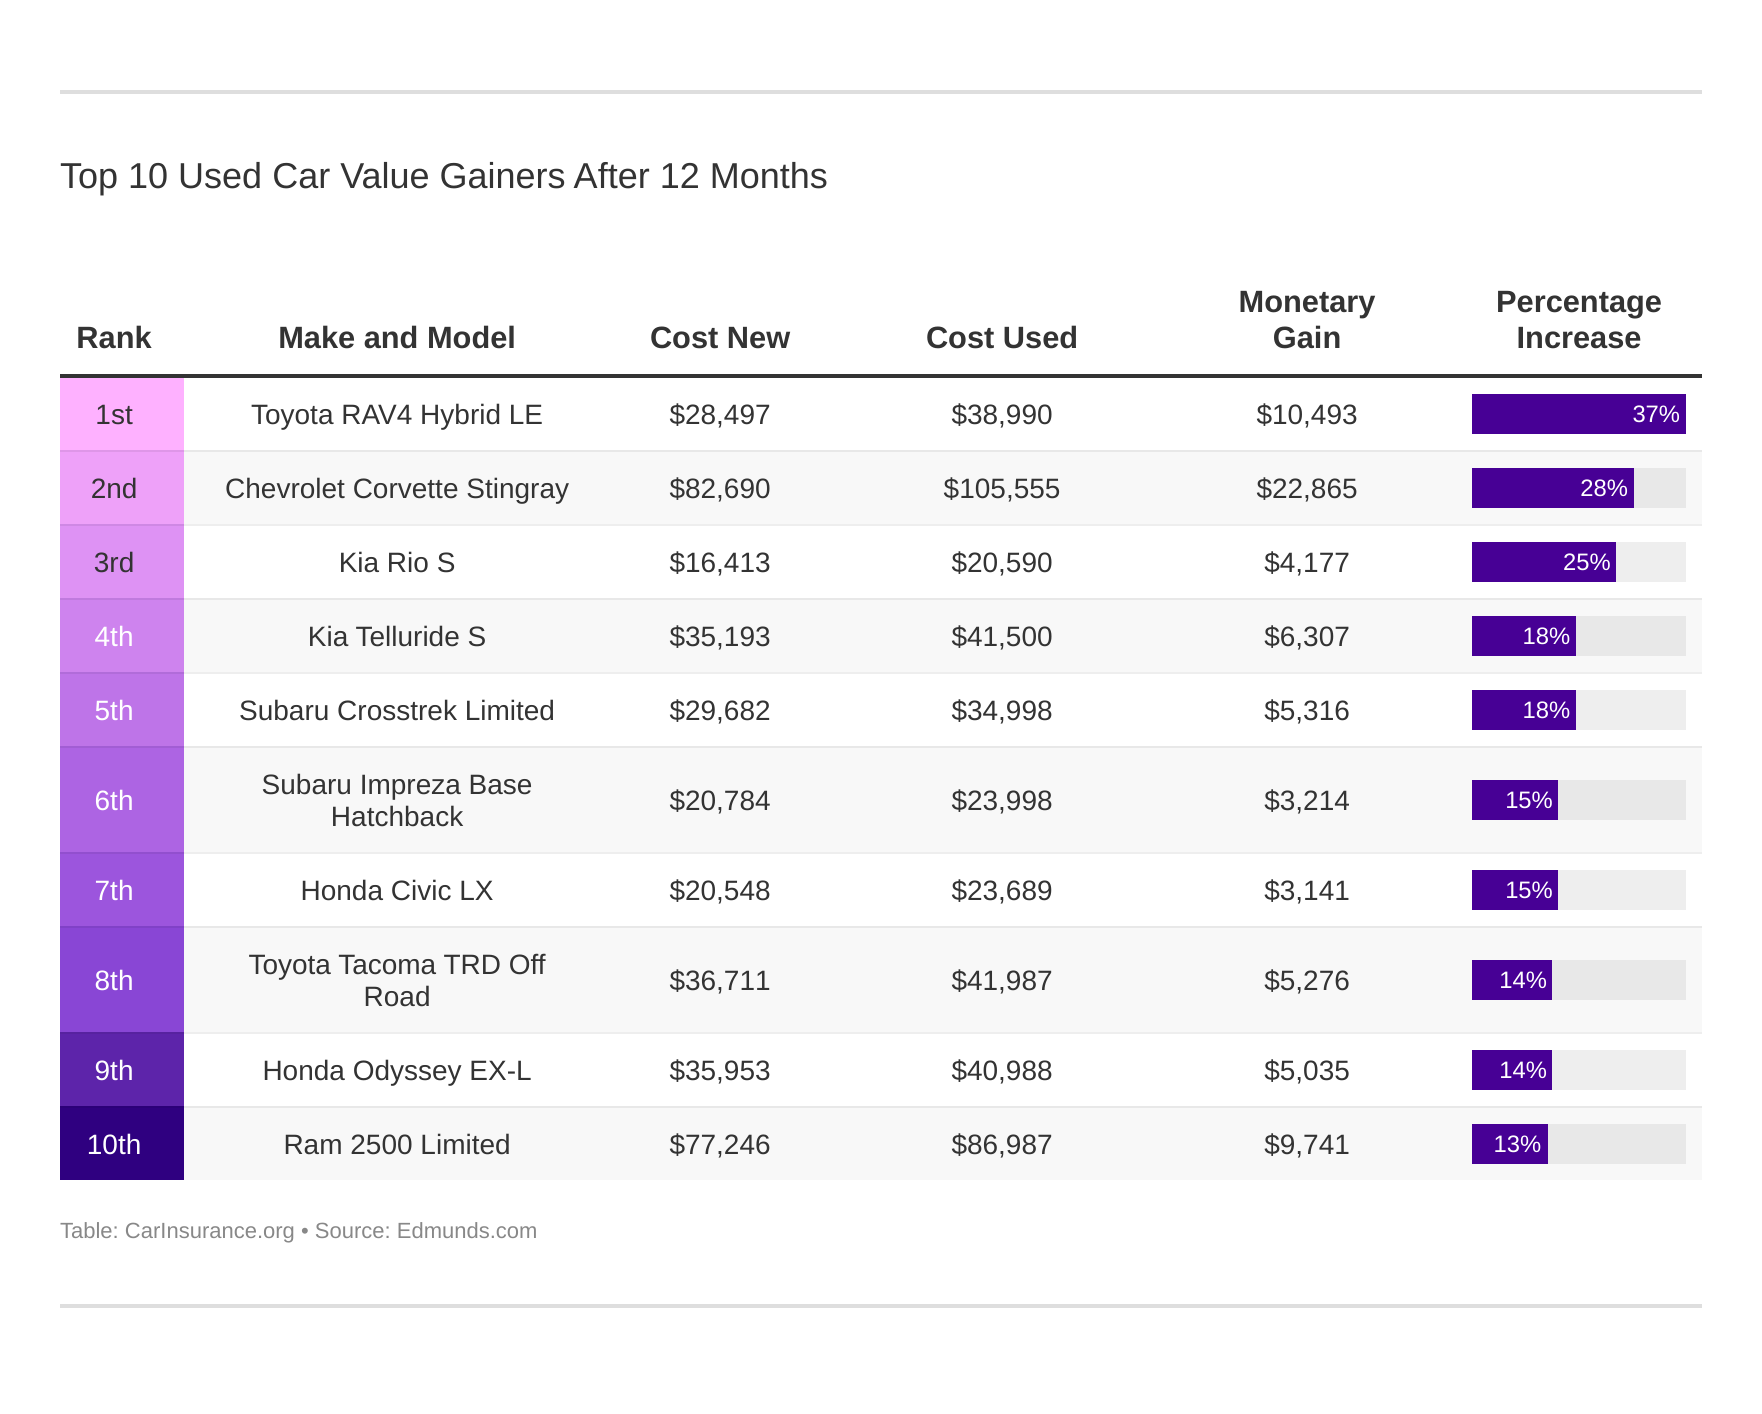 Top 10 Used Car Value Gainers After 12 Months